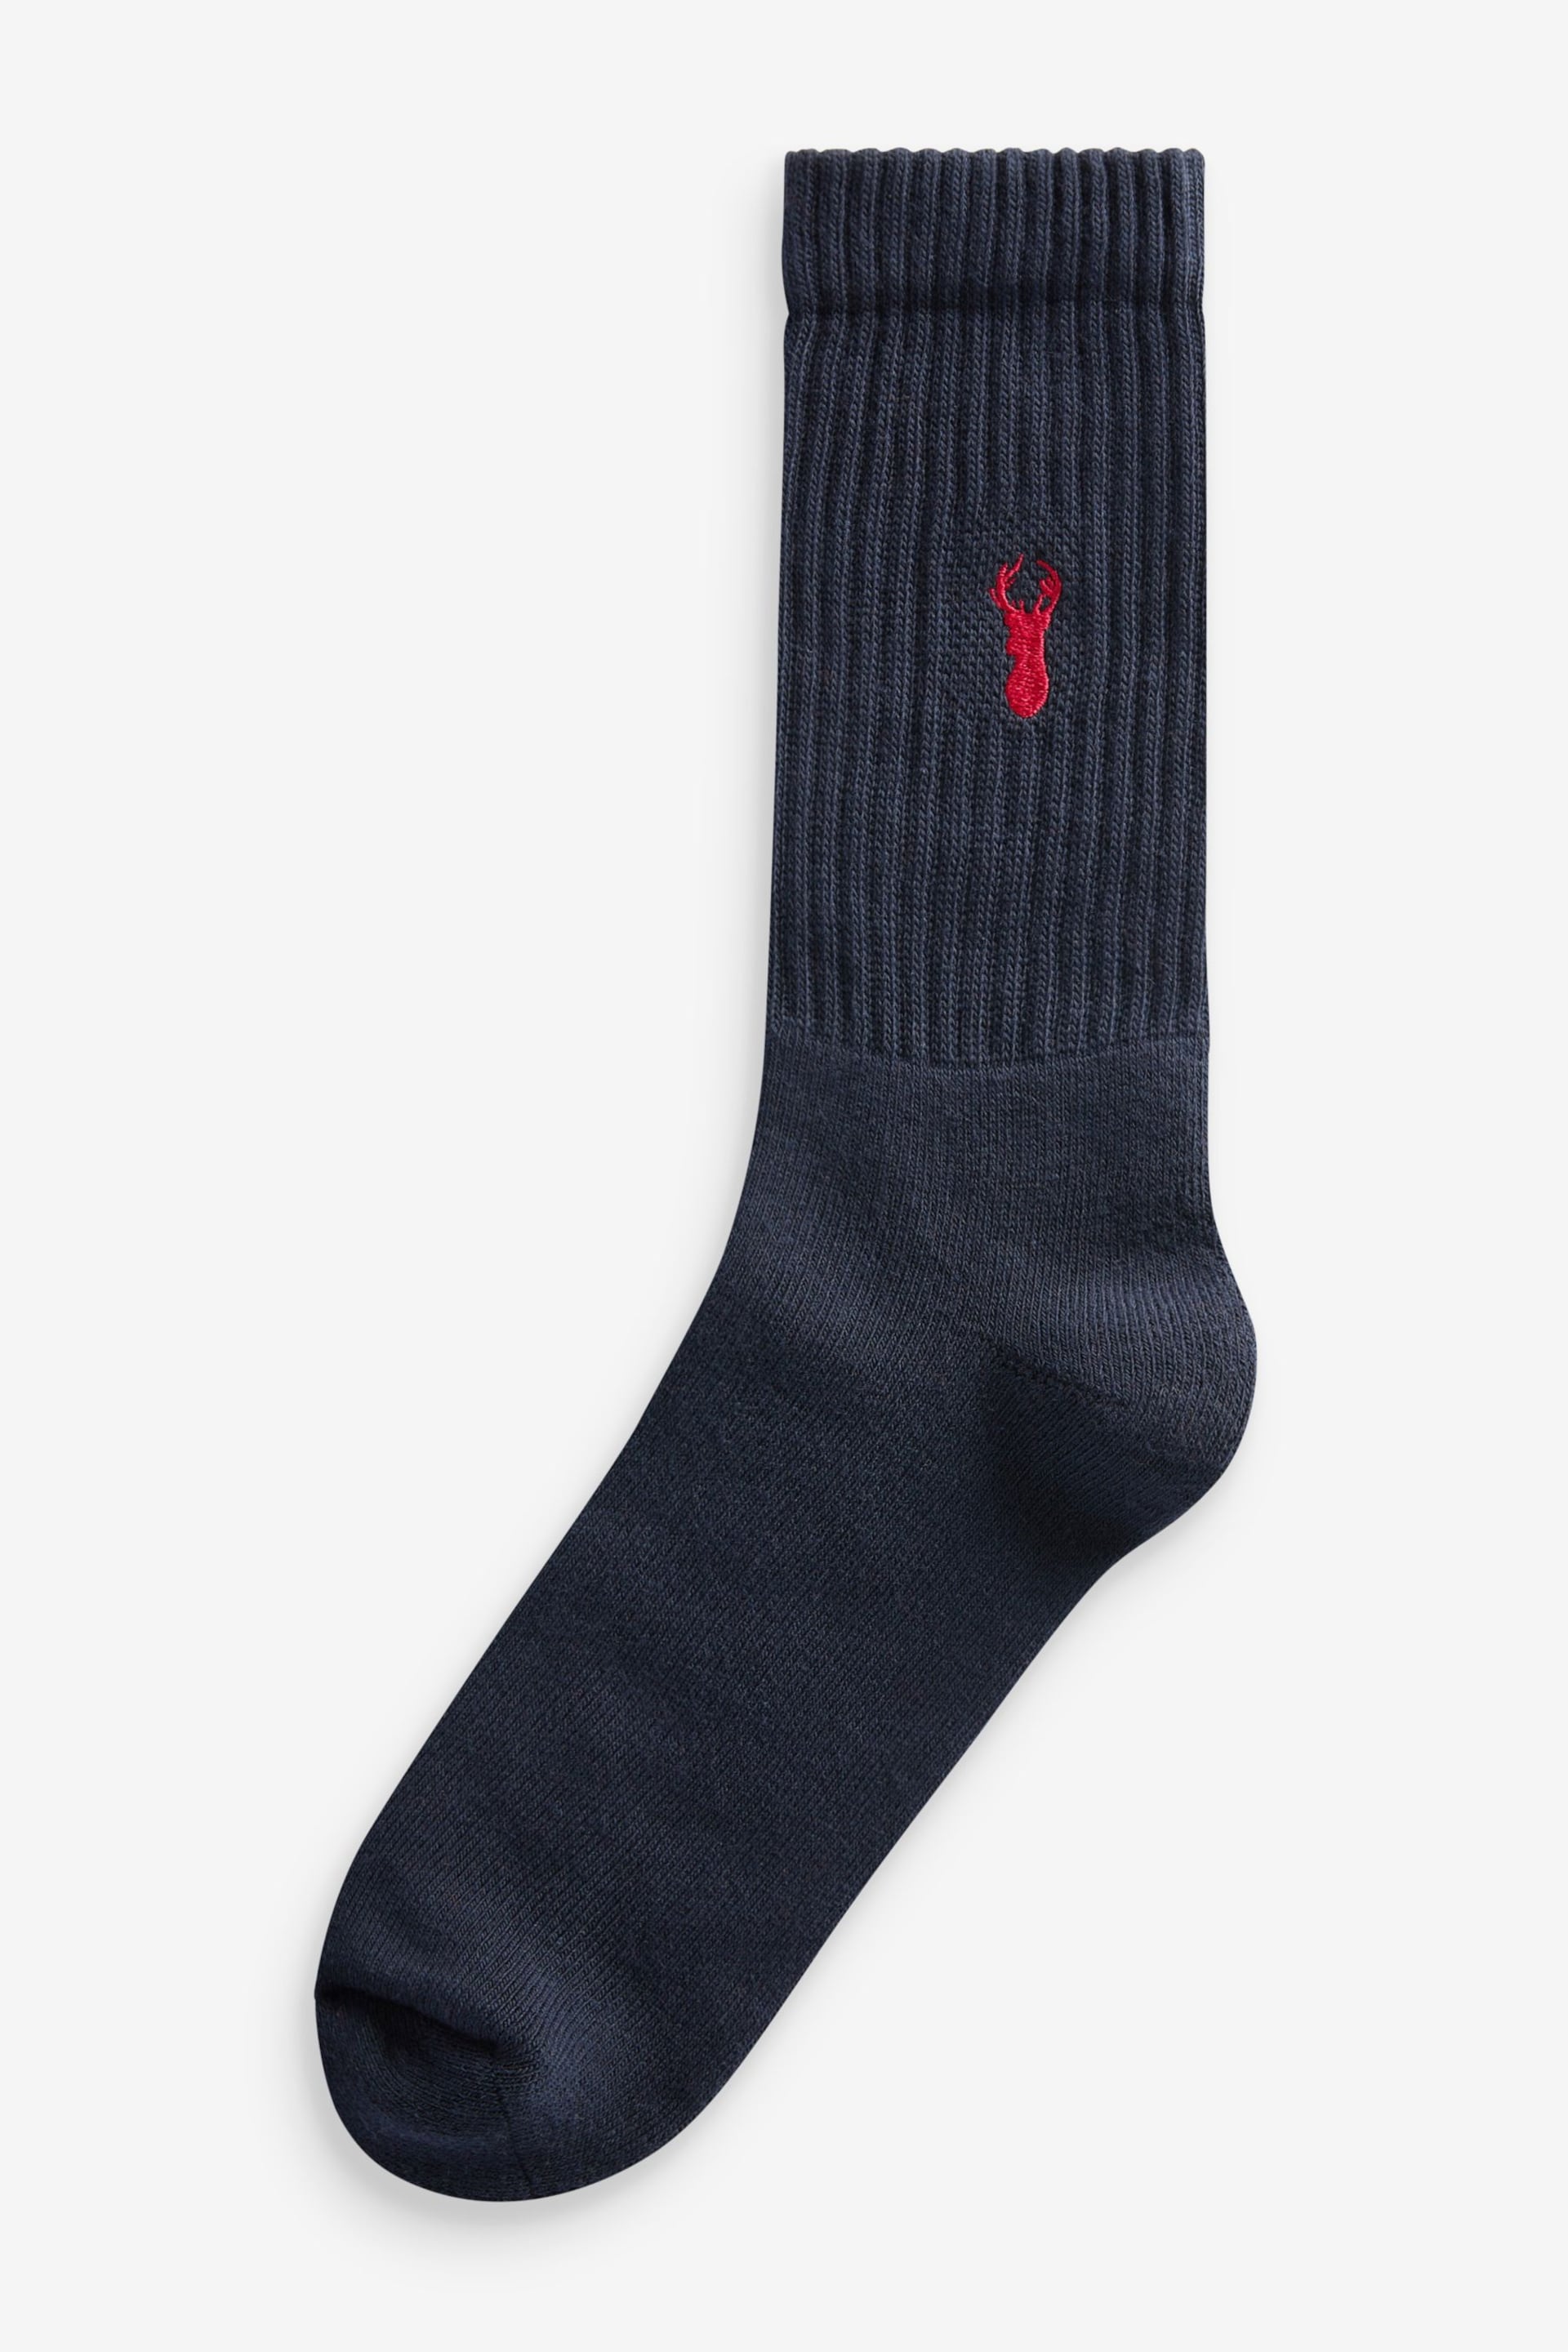 Rich 10 Pack Heavyweight Socks - Image 9 of 12